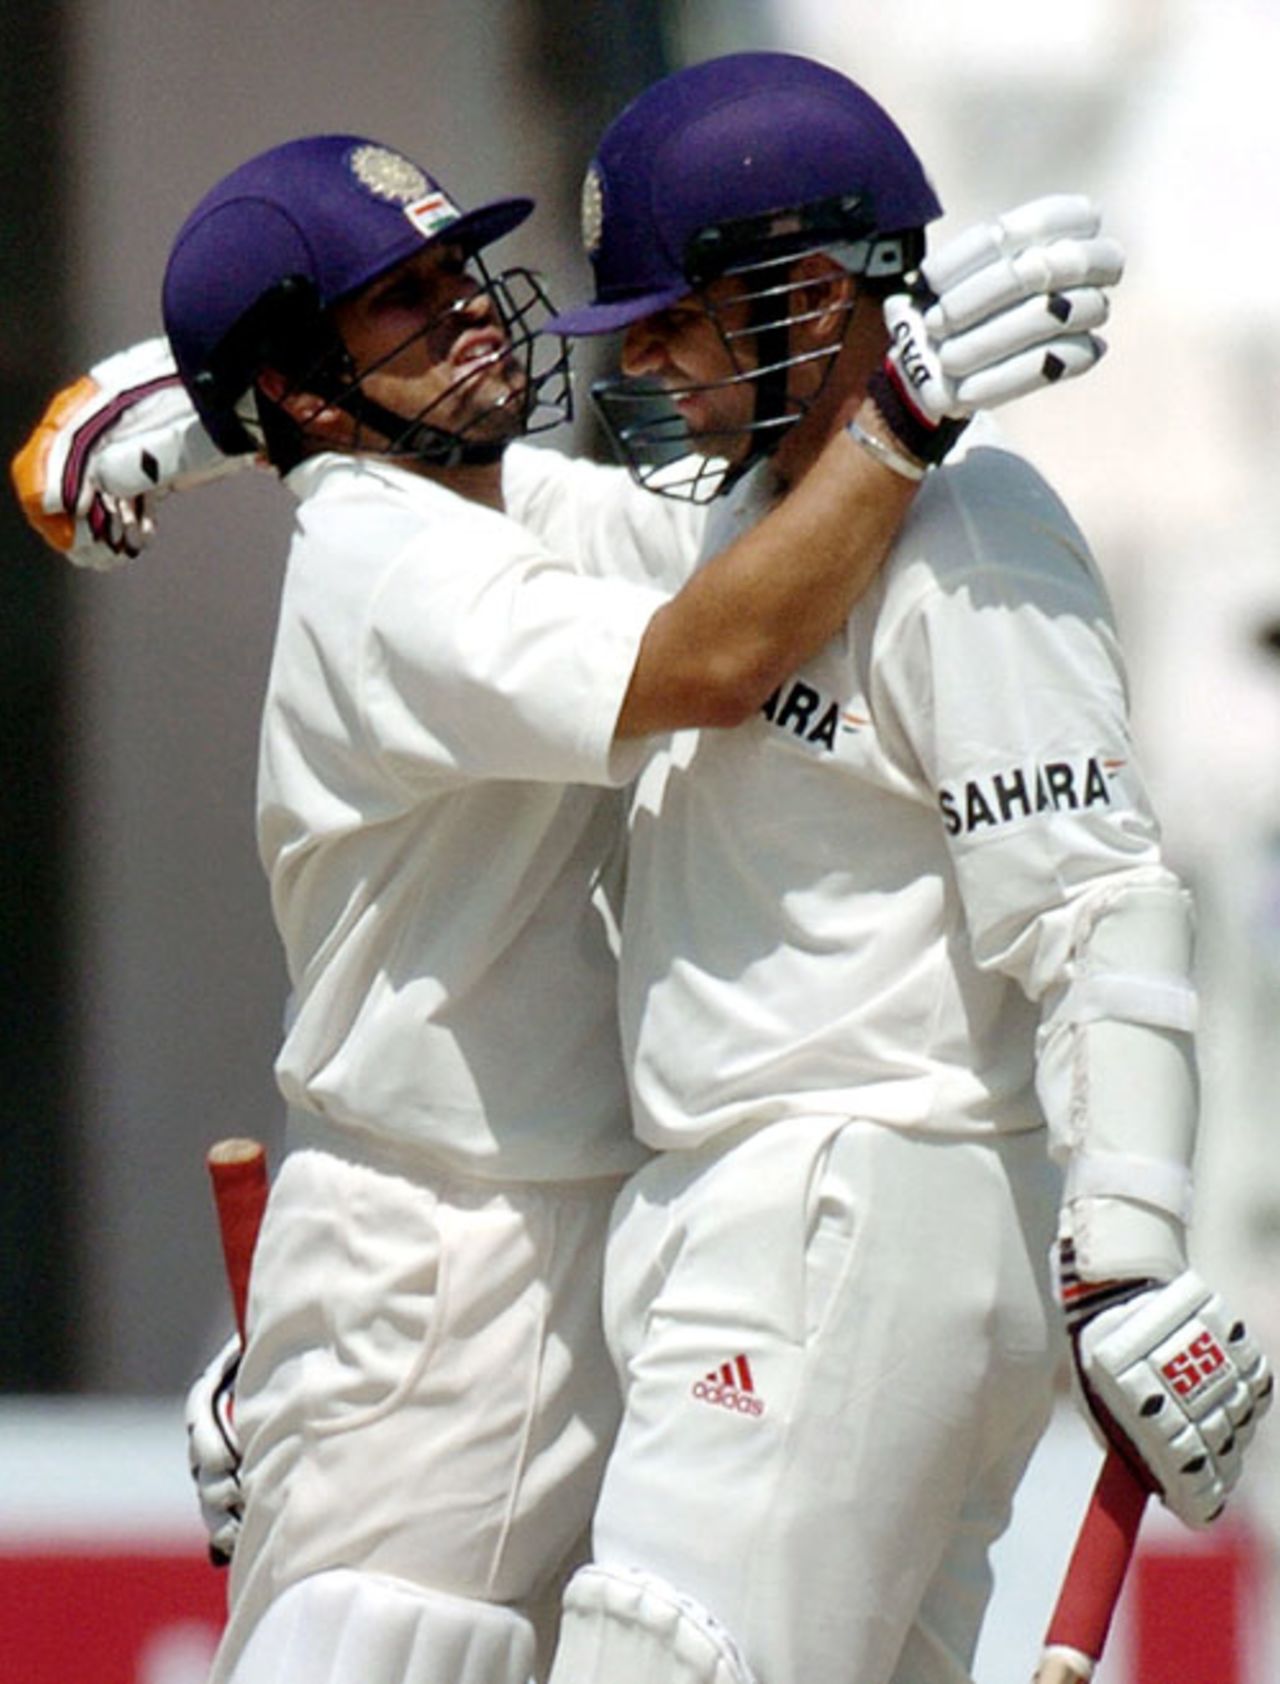 Virender Sehwag is congratulated by Sachin Tendulkar after getting to his triple-century, Pakistan v India, 1st Test, Multan, 2nd day, March 29, 2004